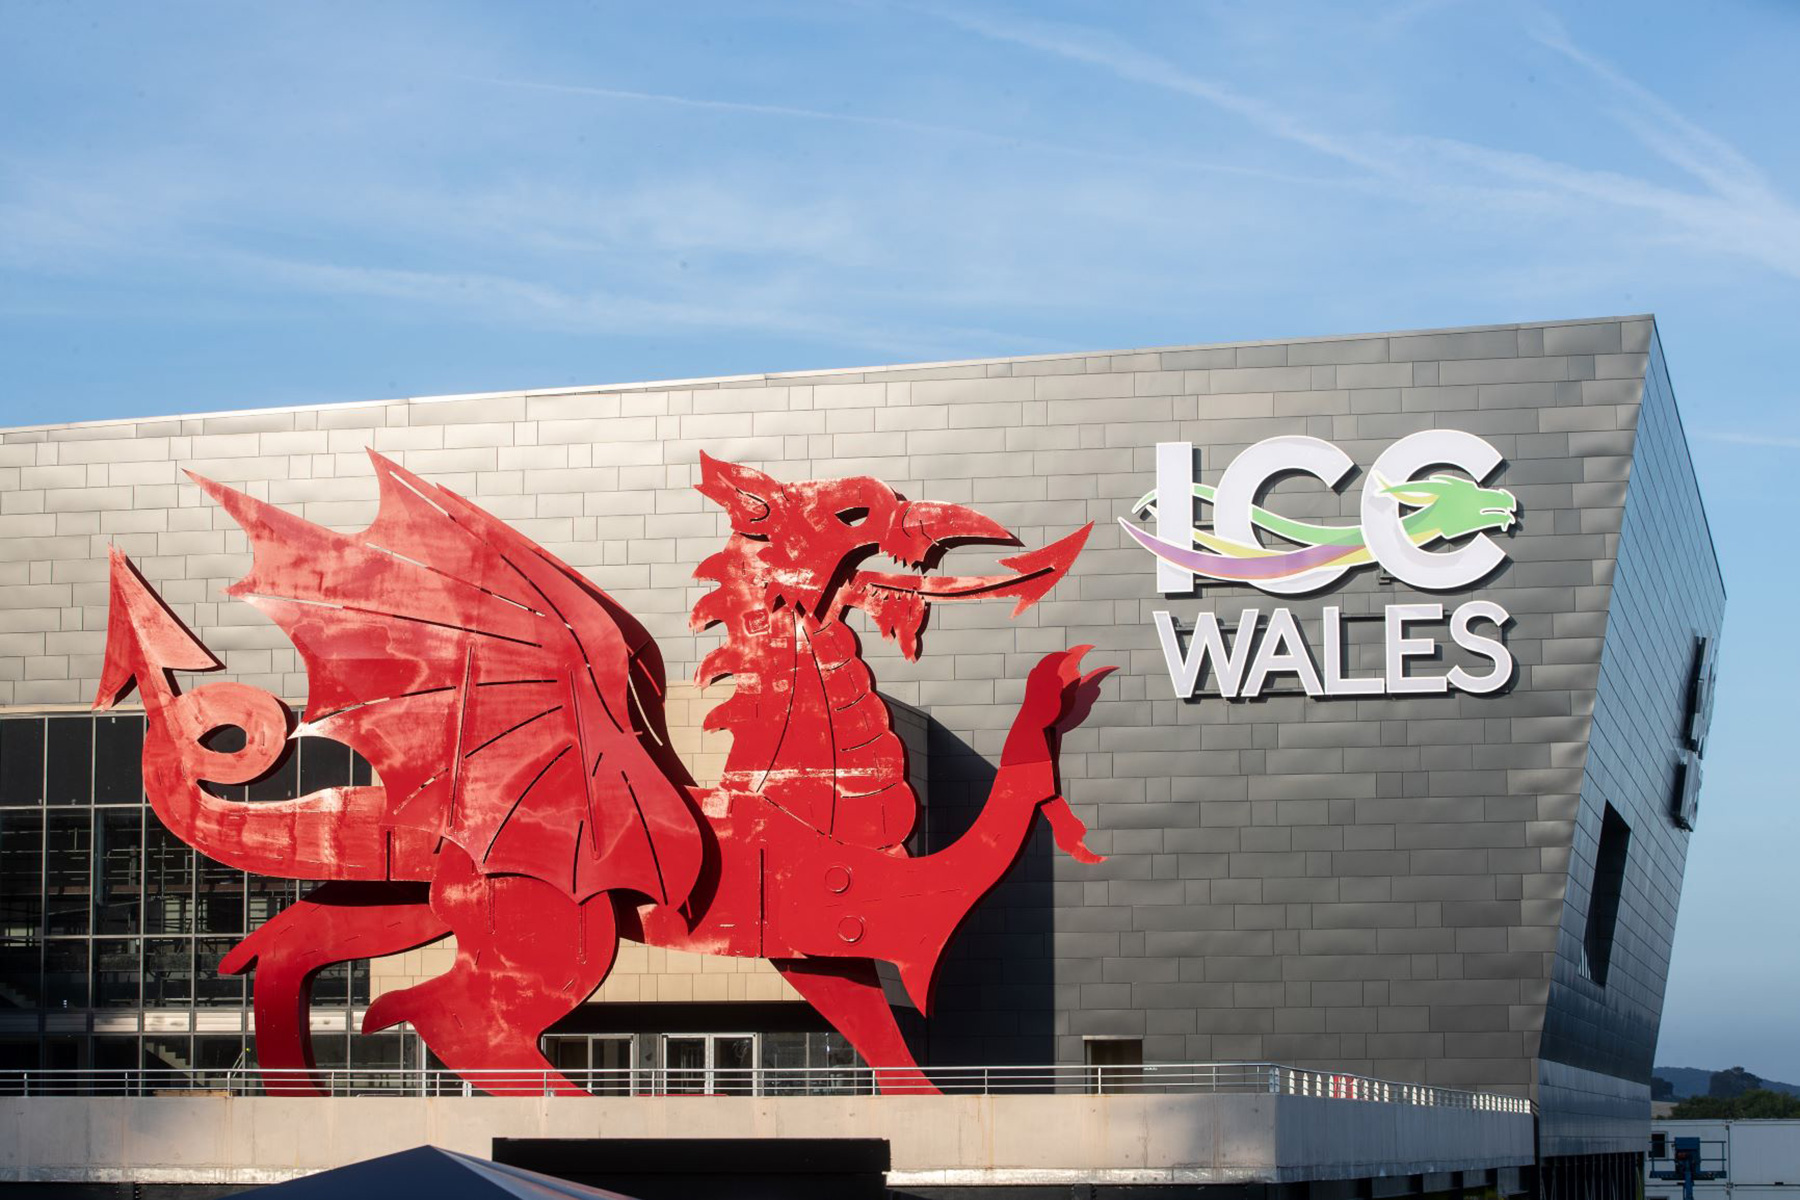 icc_wales